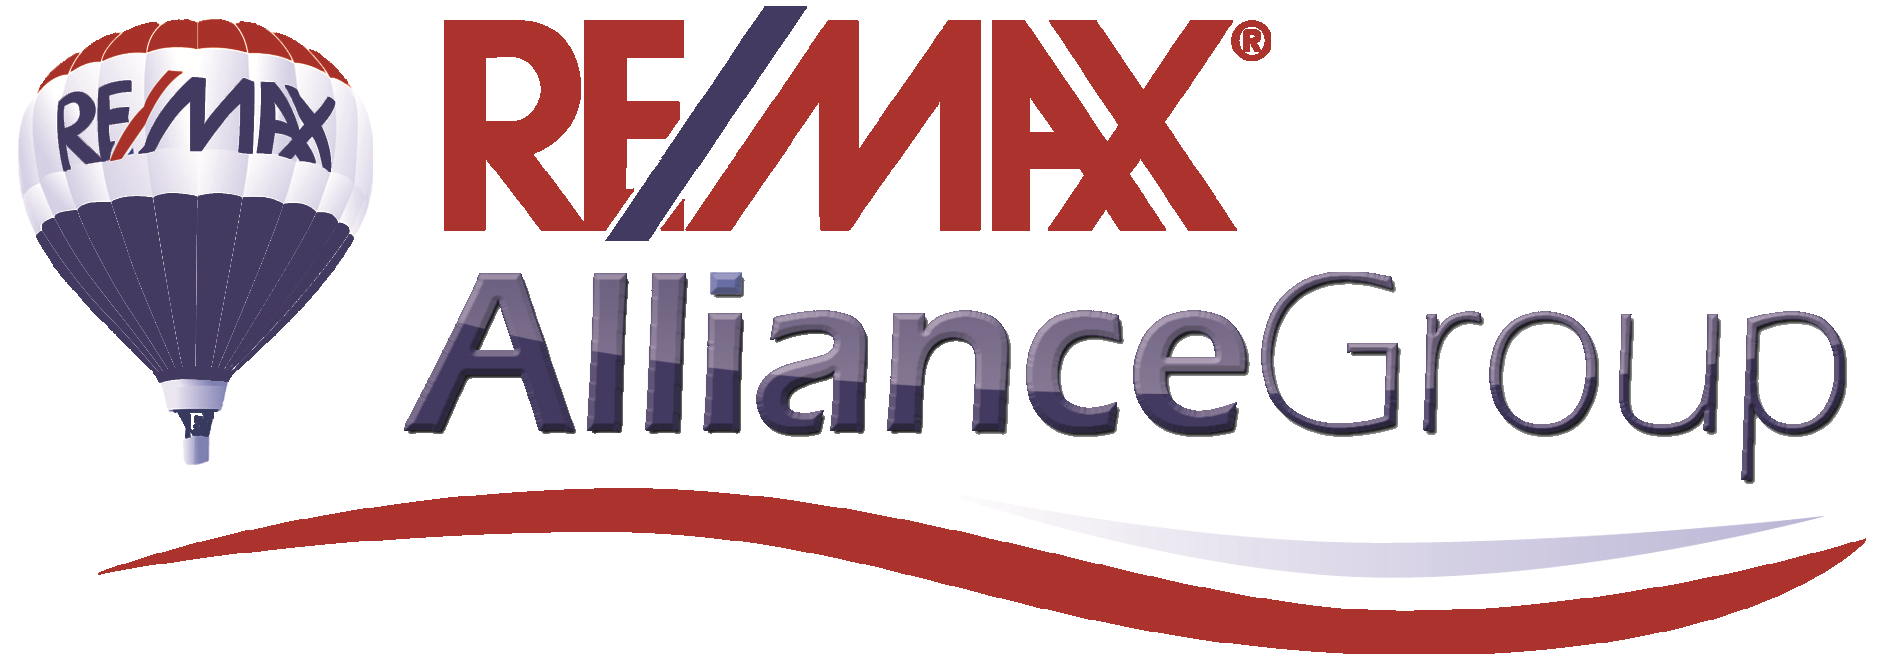 REMAX Alliance Group